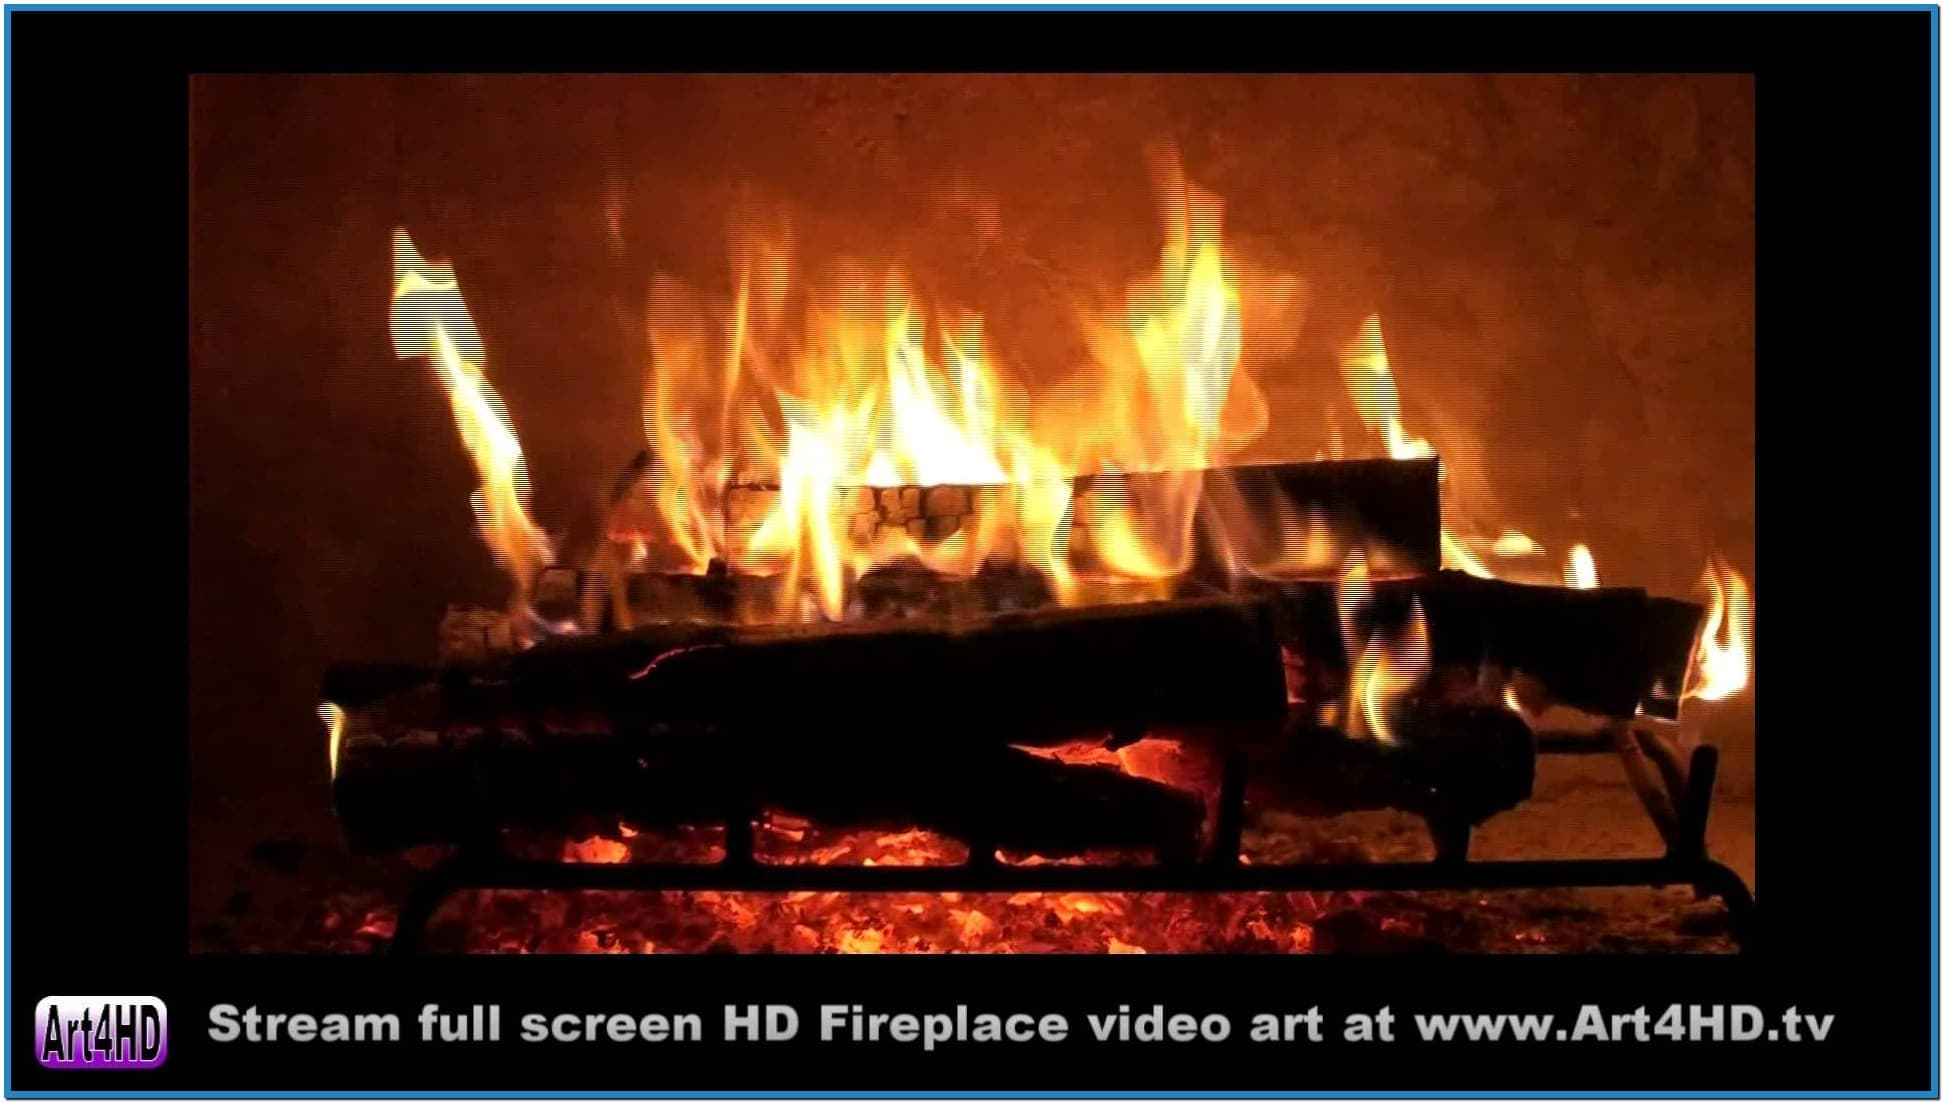 Burning Fireplace Wallpaper Submited Image